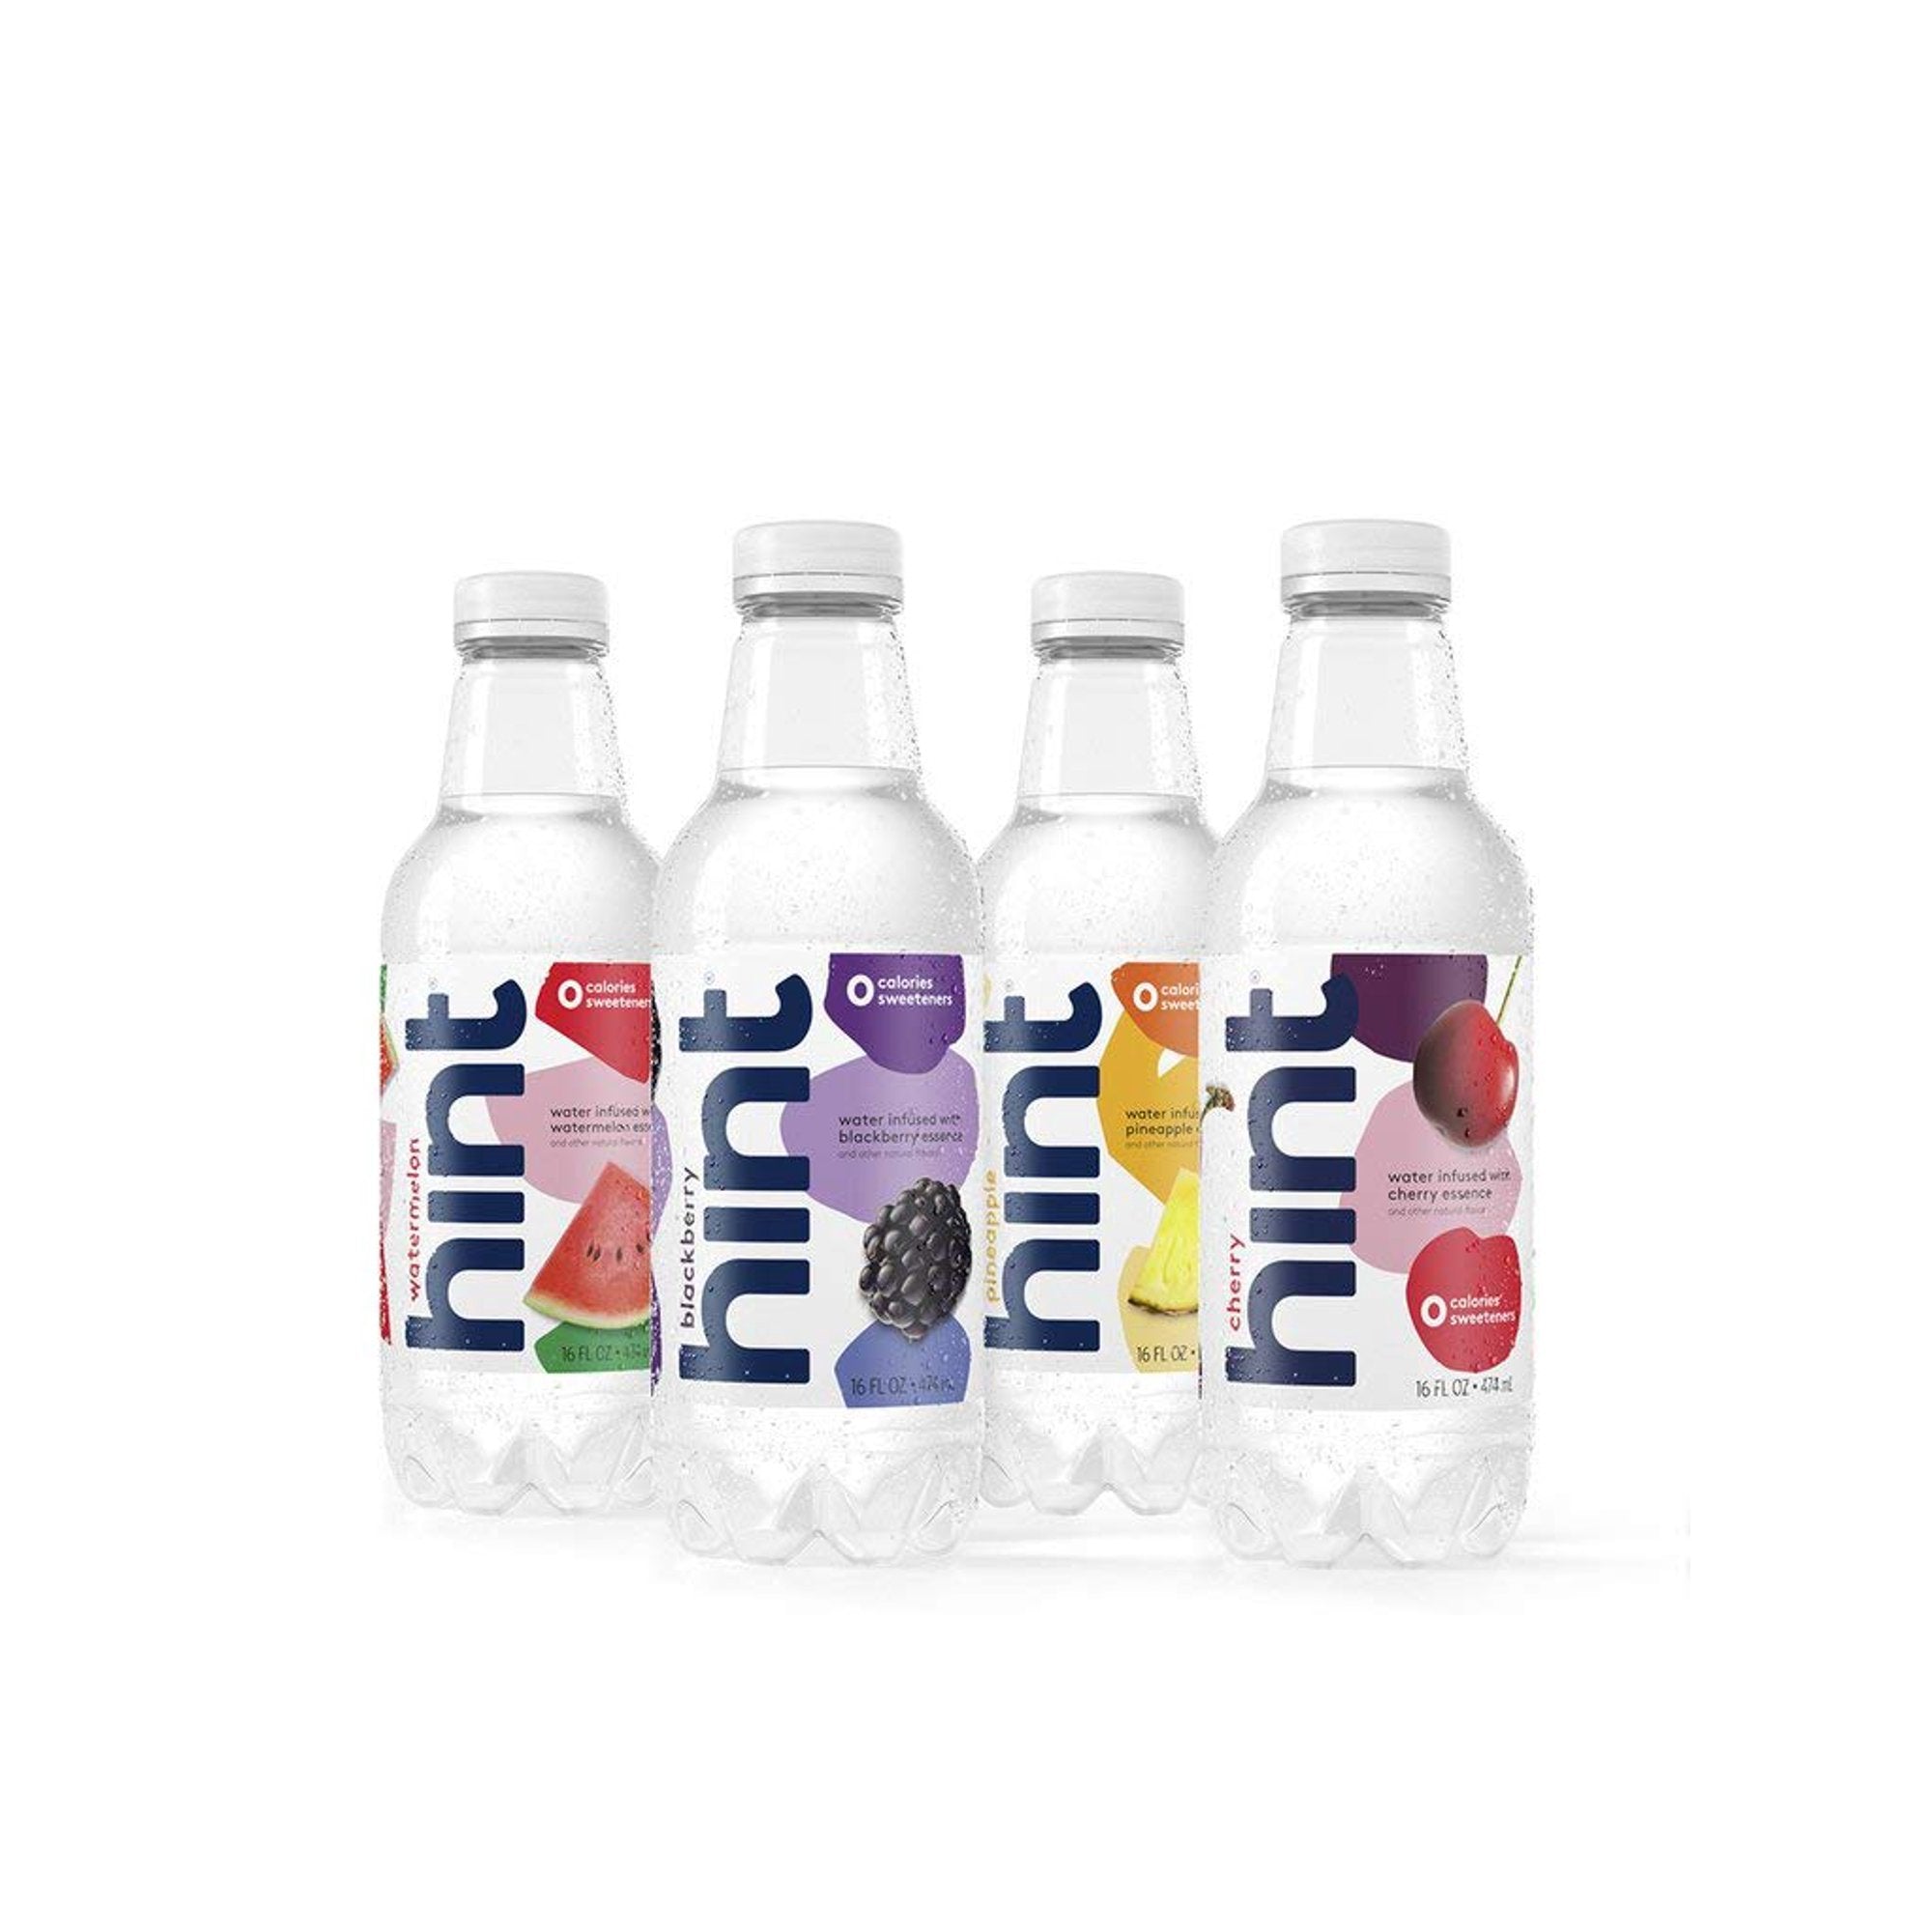 Hint Fruit Infused Water, Variety Pack, Cherry, Watermelon, Pineapple, Blackberry, 16 oz (12 Pack)